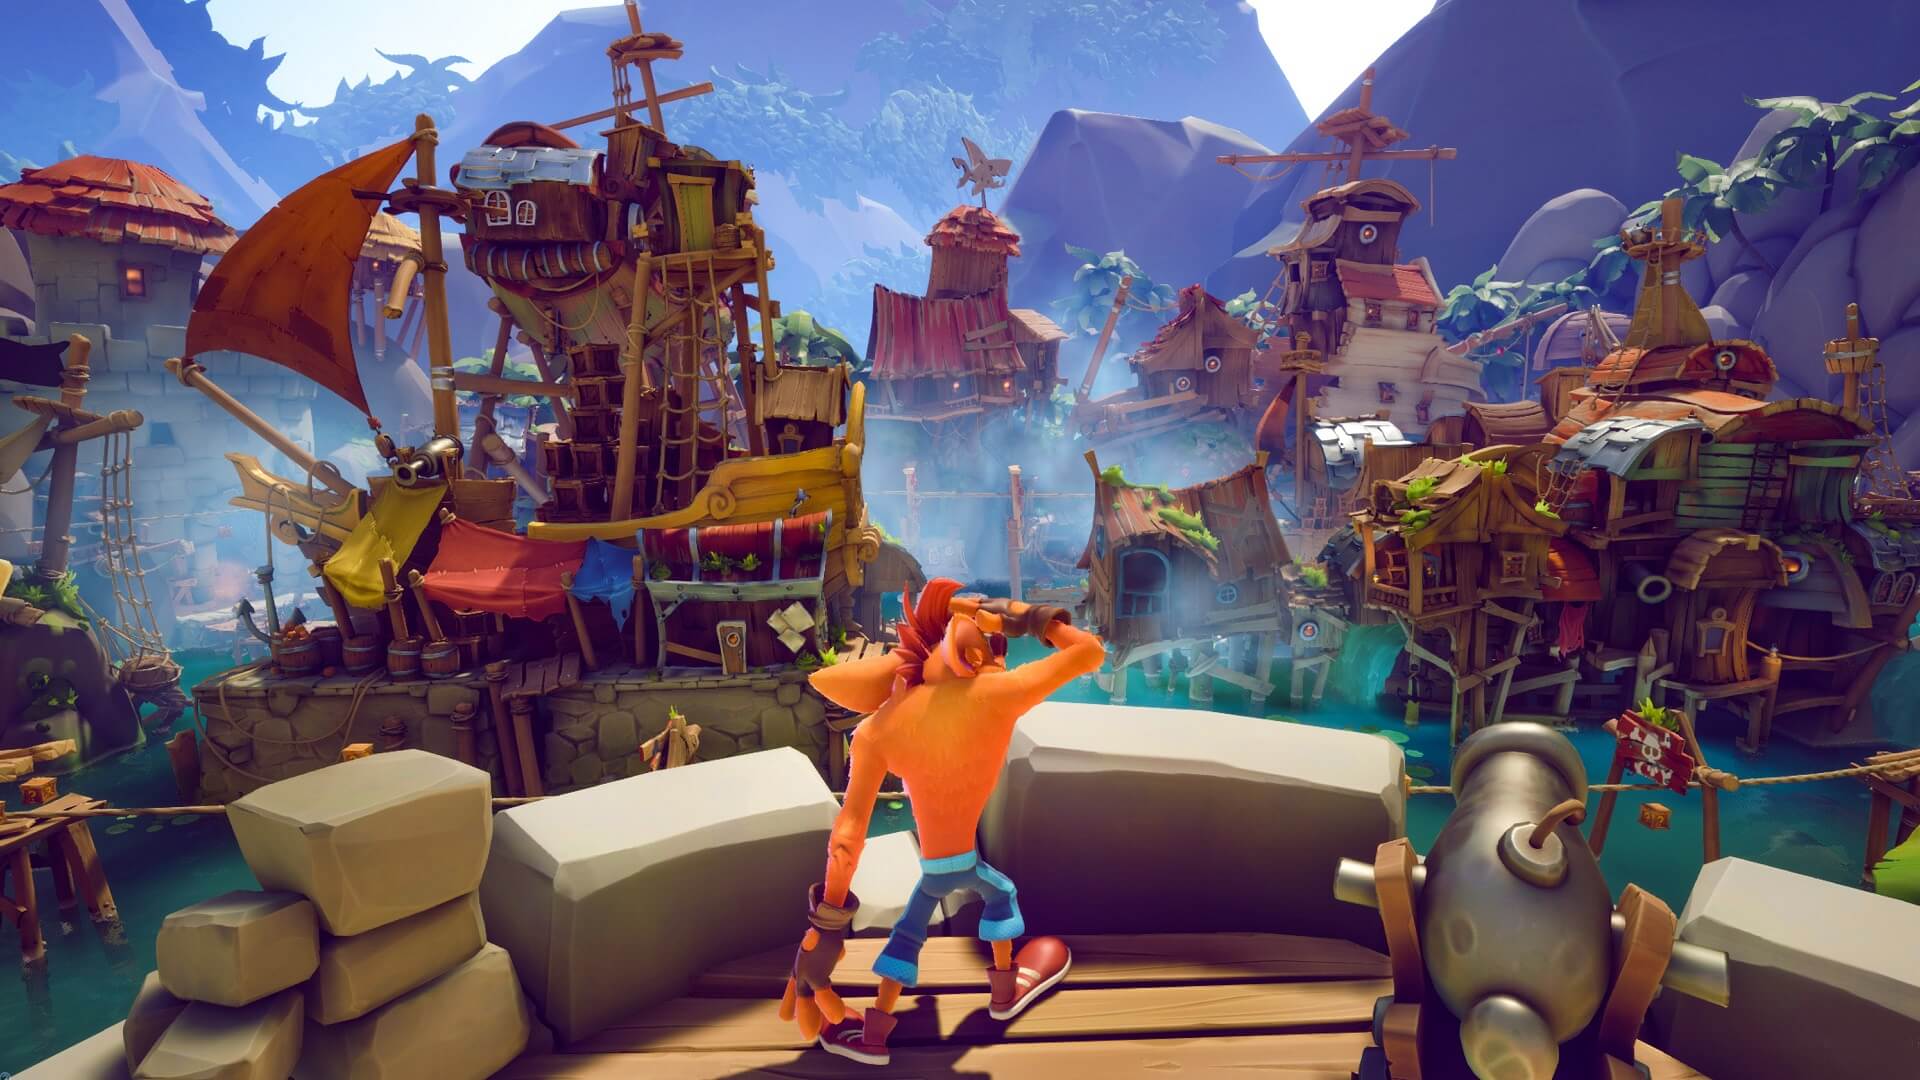 Crash looking out over a detailed pirate landscape in Crash Bandicoot 4, one of the PlayStation Plus Essential July games